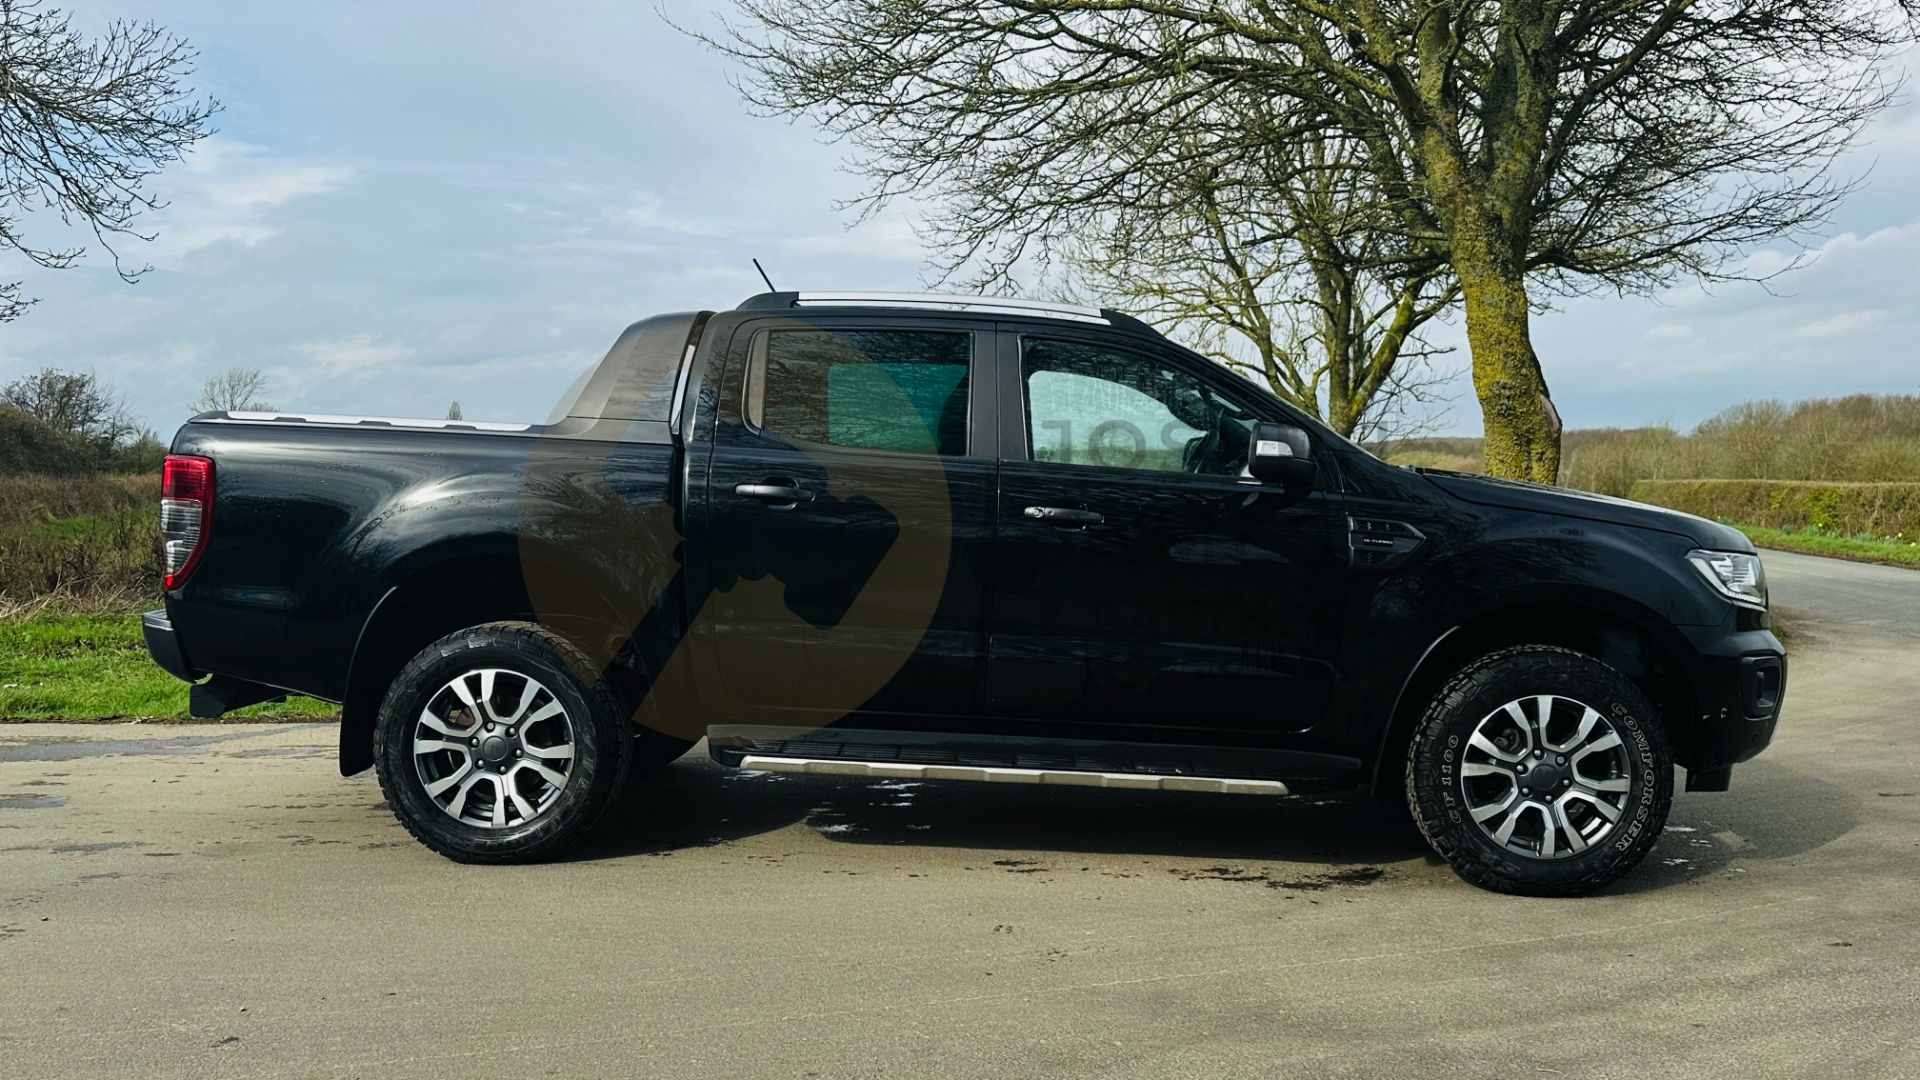 FORD RANGER *WILDTRAK* DOUBLE CAB PICK-UP (2020 - FACELIFT MODEL) 2.0 TDCI 'ECOBLUE' - 10 SPEED AUTO - Image 14 of 45